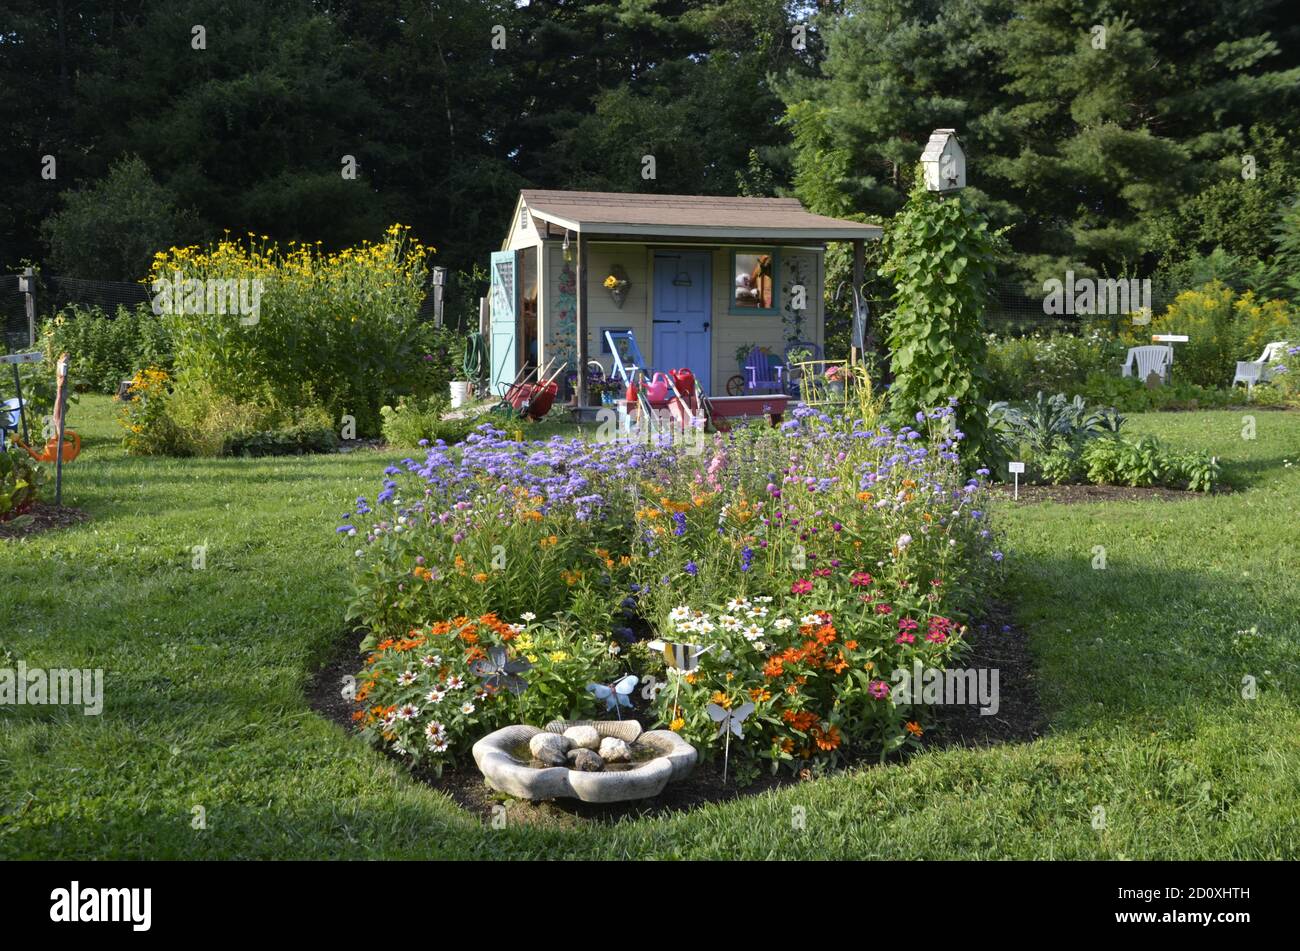 Painted shed in community garden of bright colors in blooming summer garden, Yarmouth, Maine, USA Stock Photo